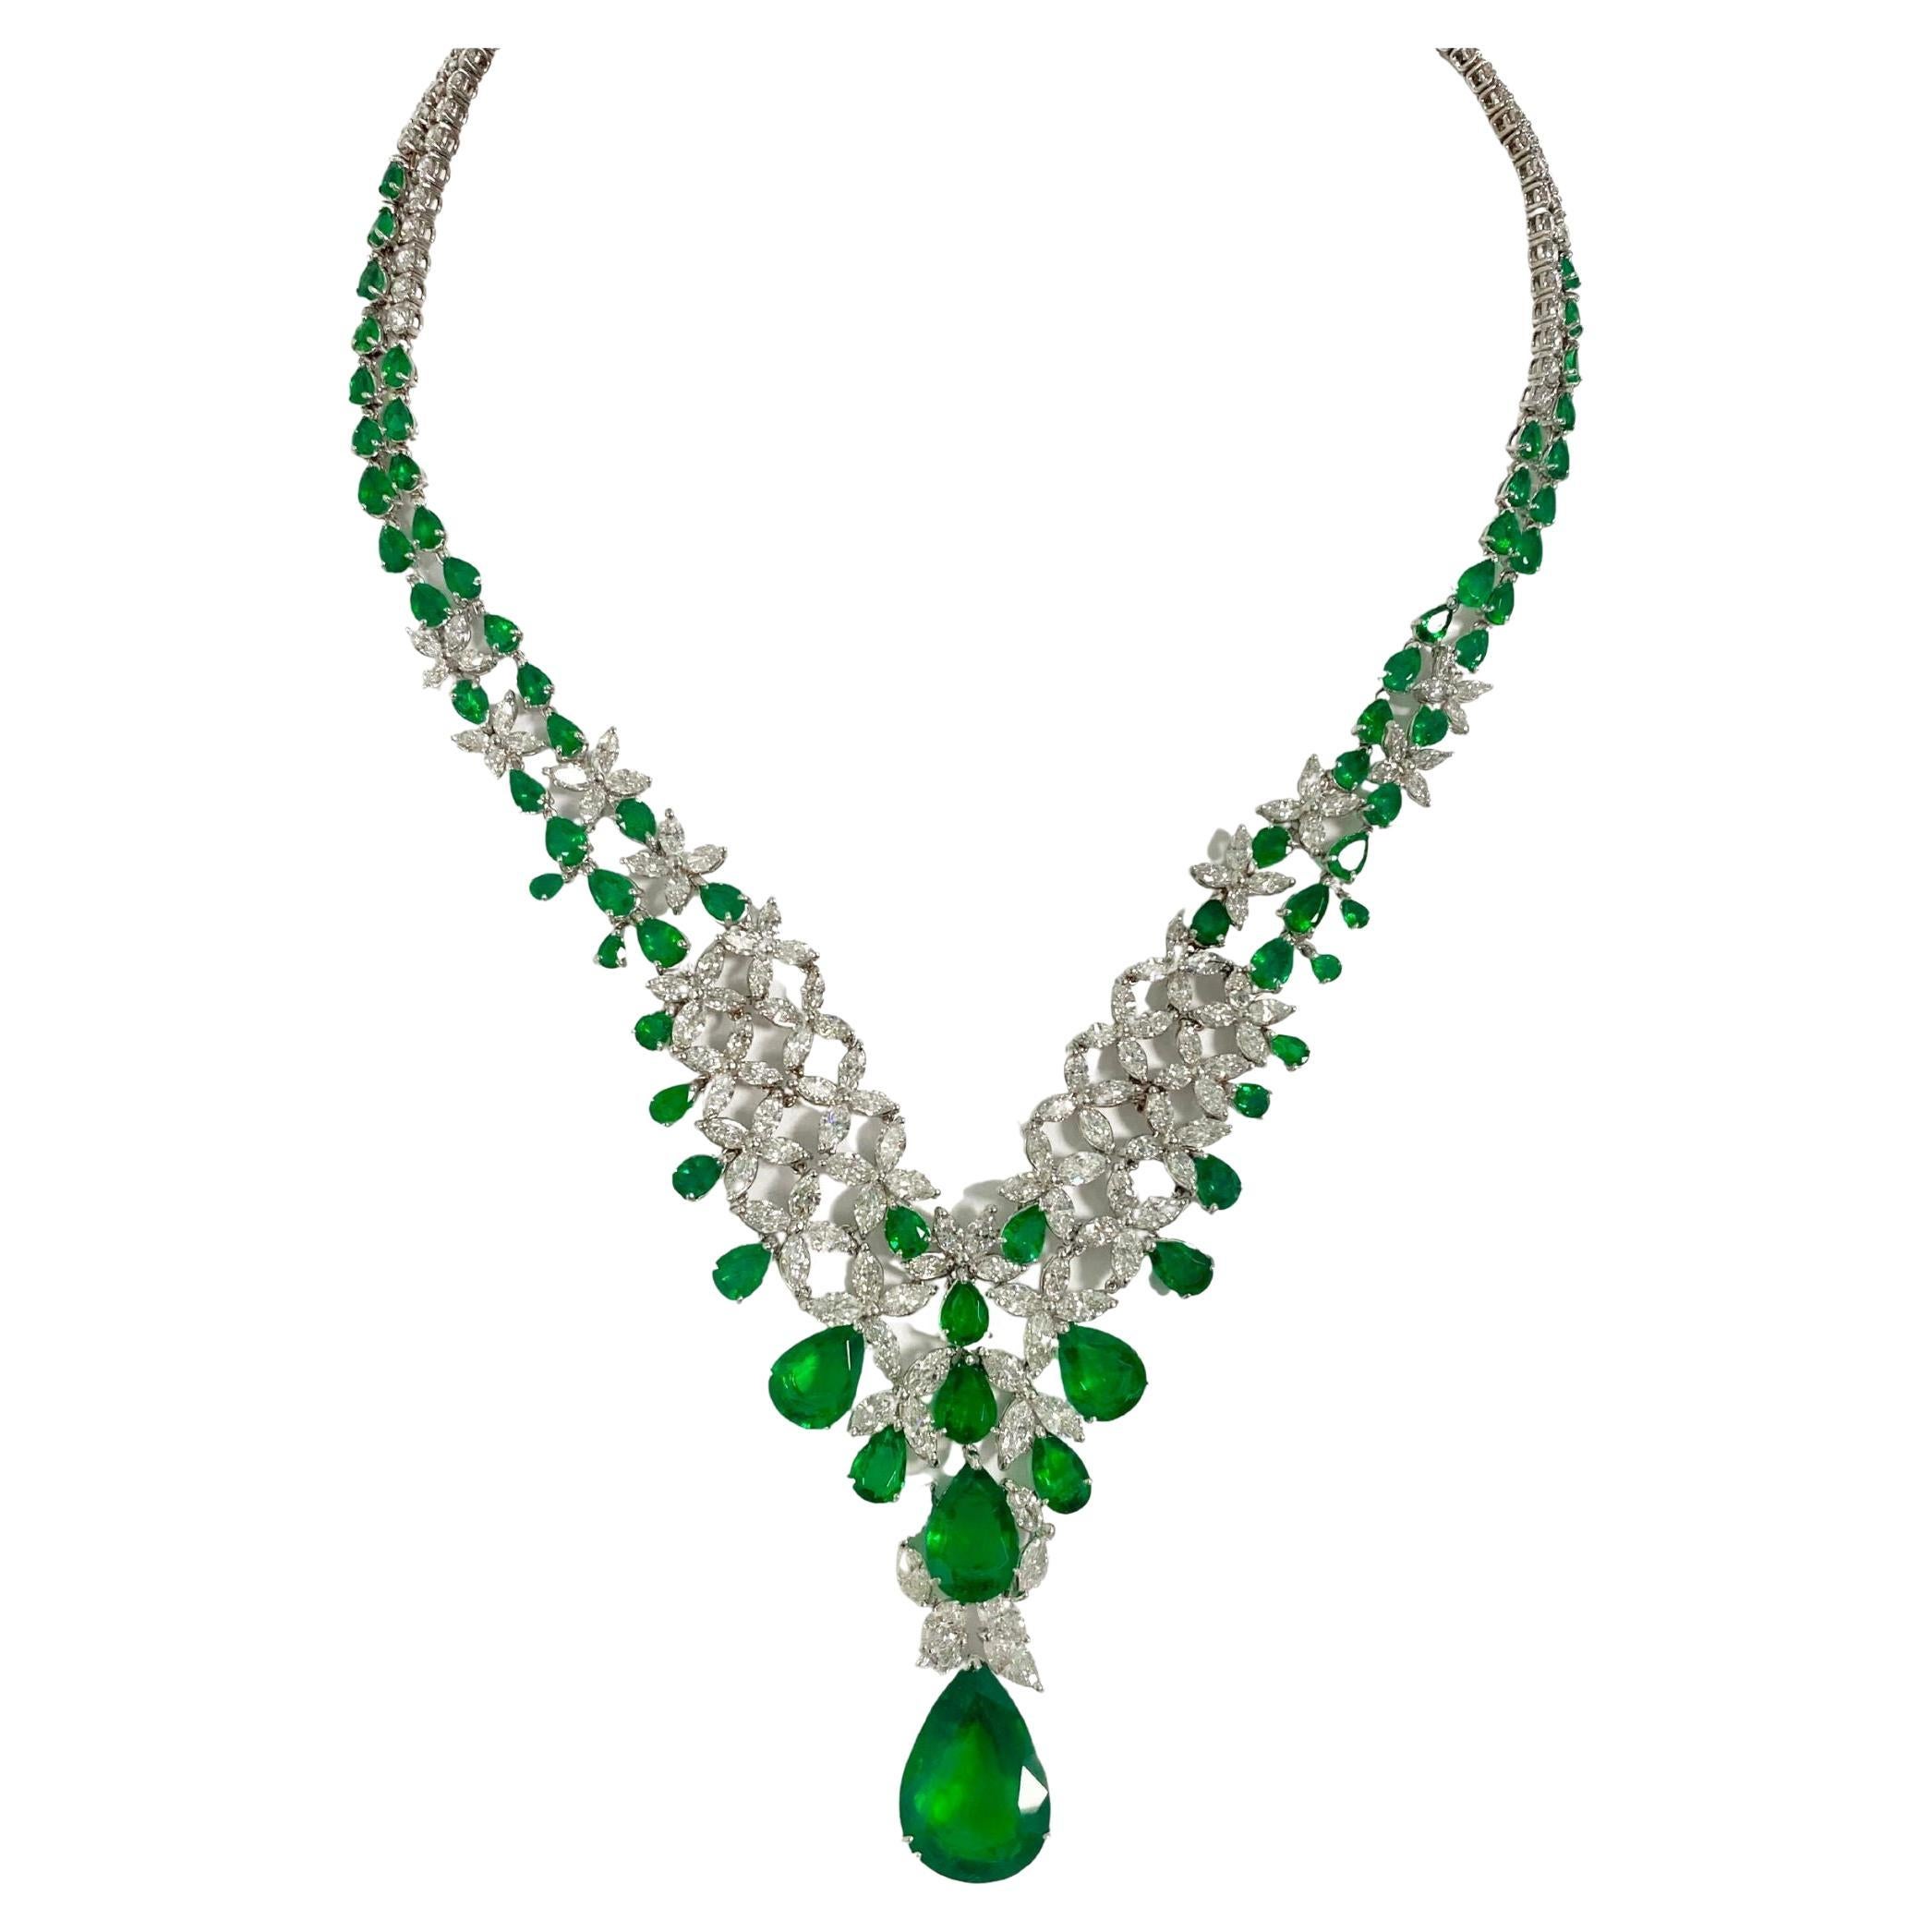 Emerald Pear Necklace 46.67 CT